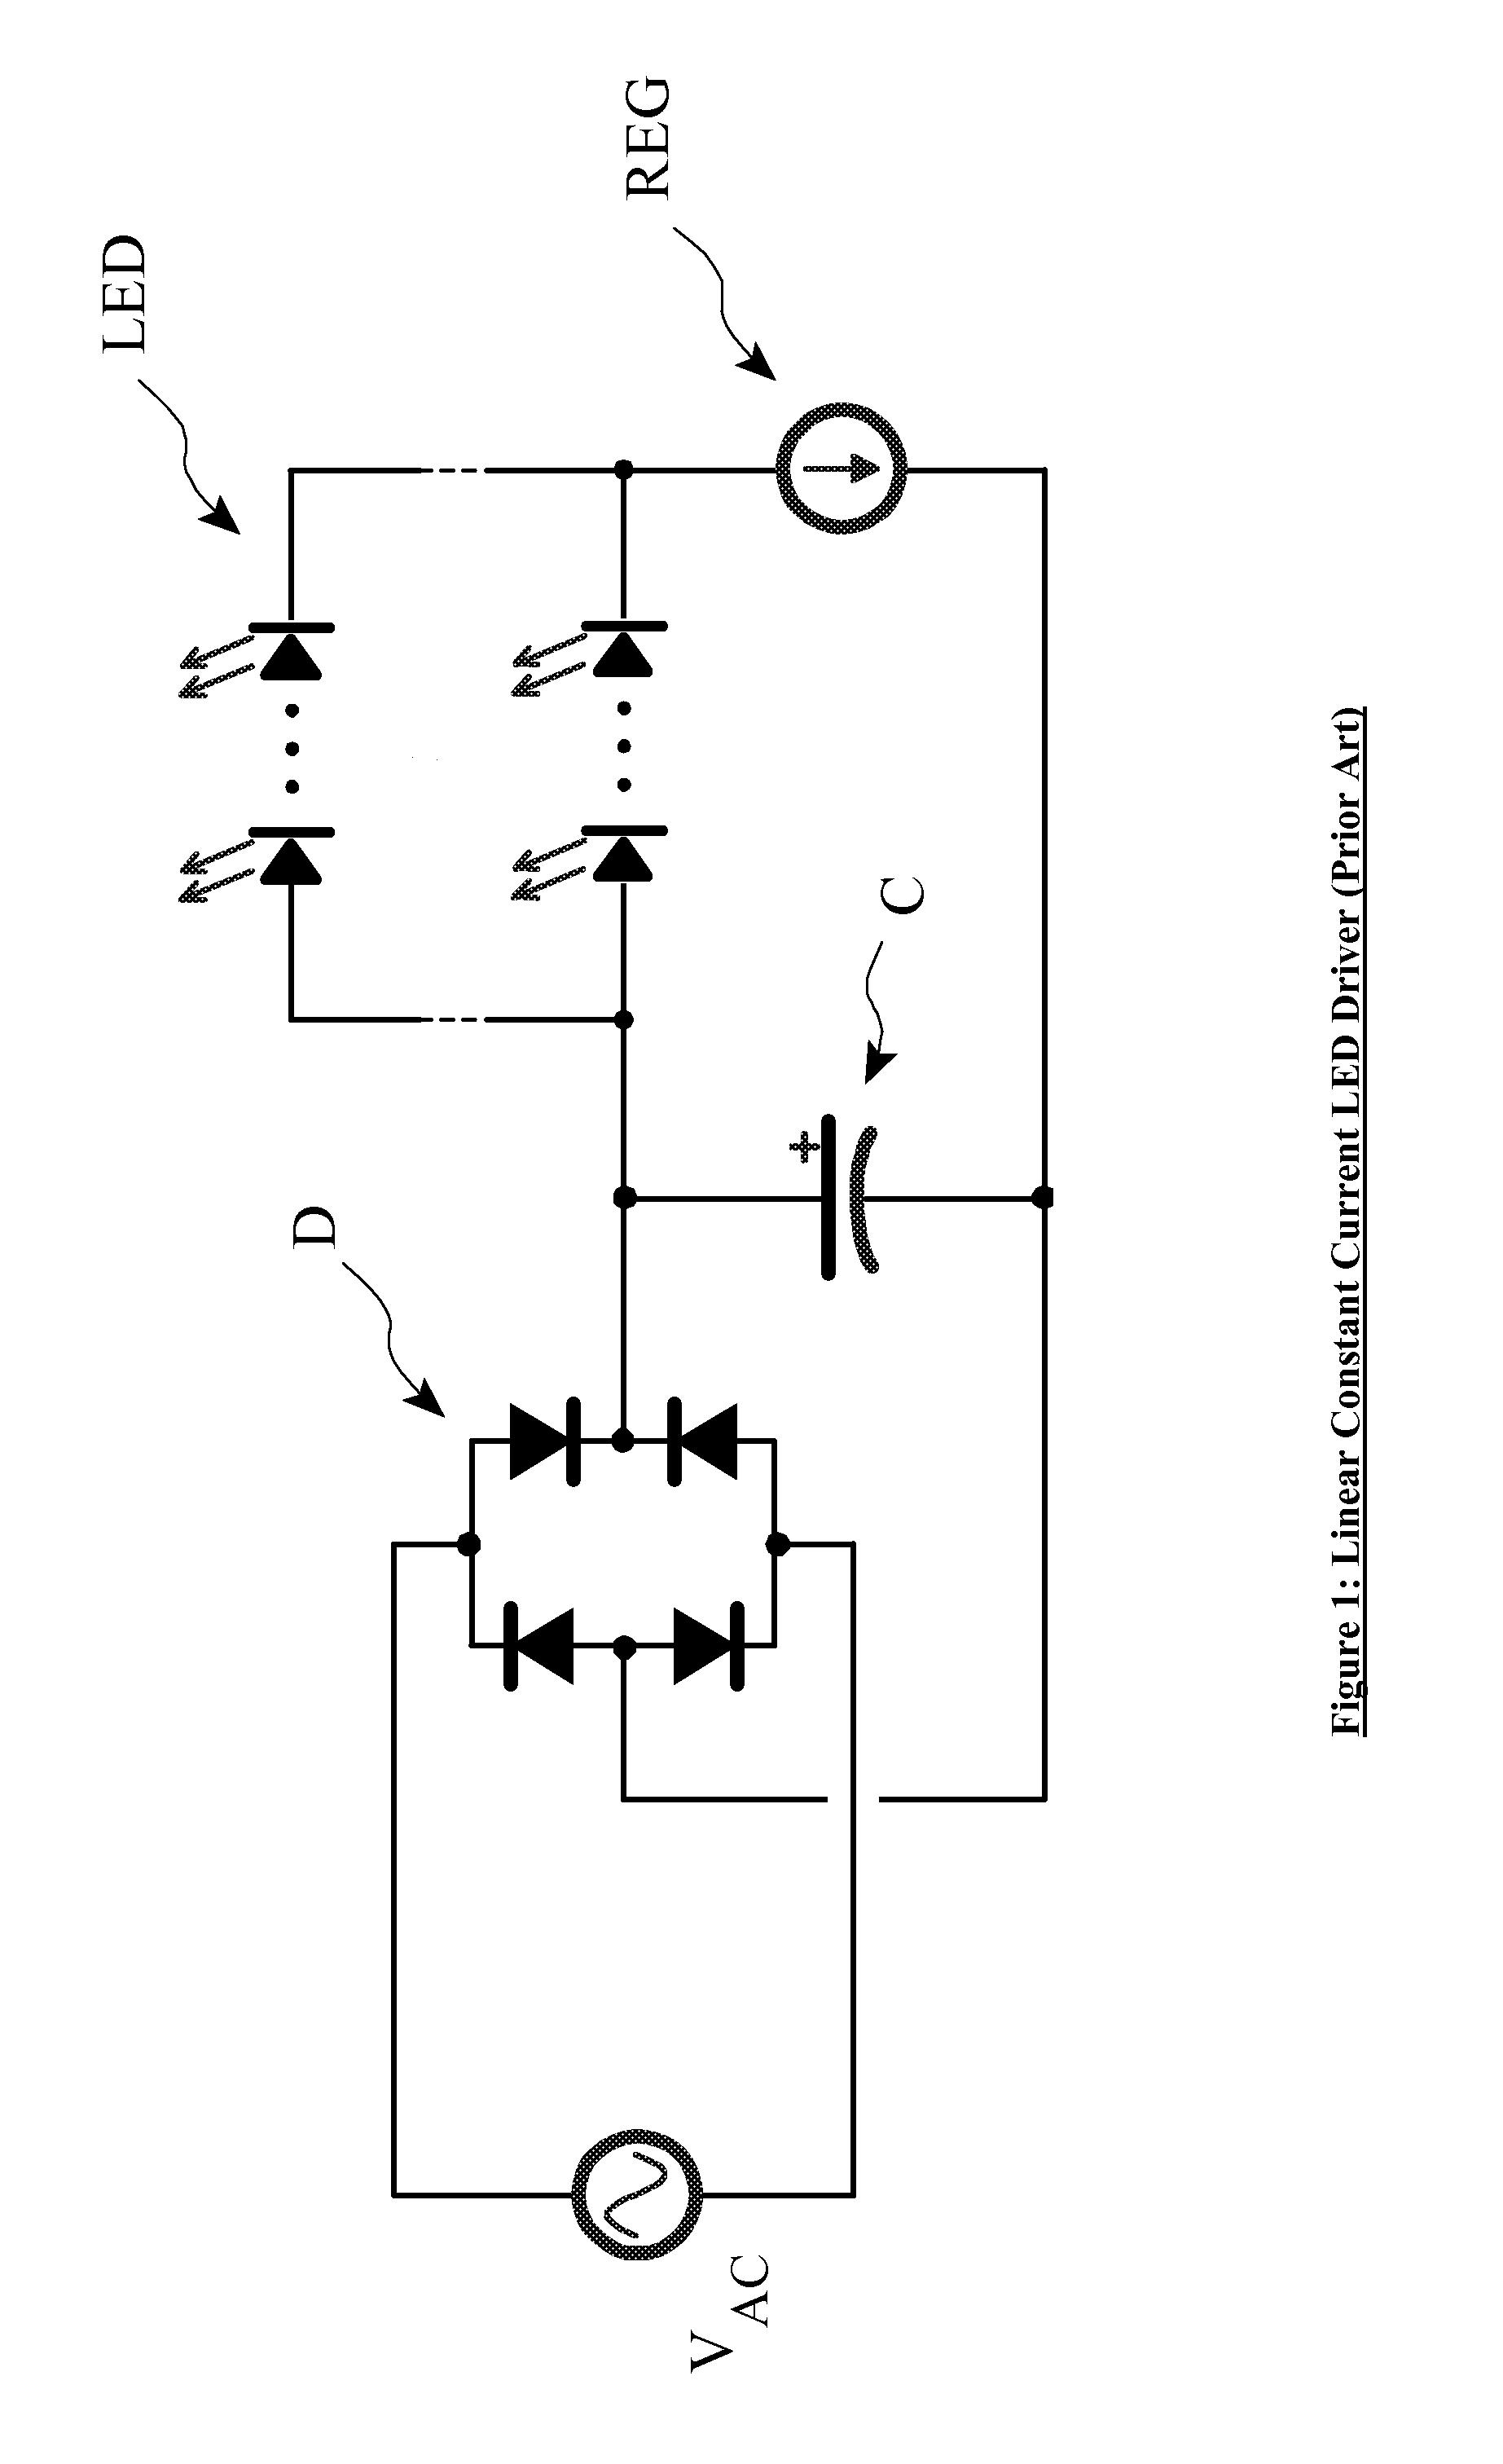 Multiple stage sequential current regulator